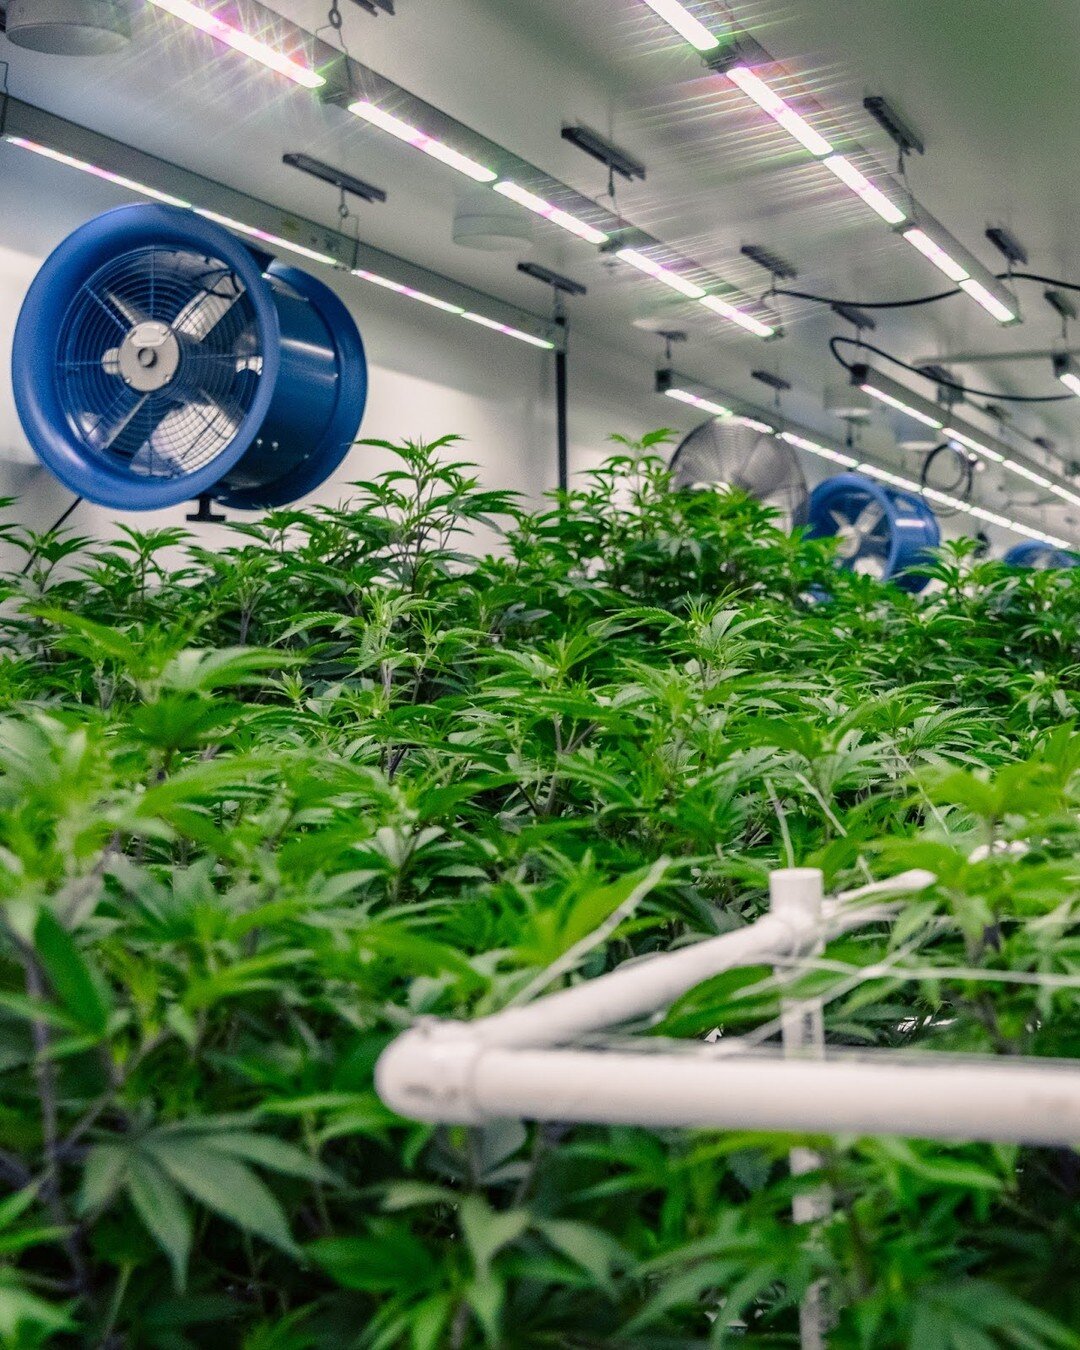 Did you know that we are committed to a more sustainable growing process?

By meticulously controlling temperature, humidity, light, and nutrient delivery, we can cultivate cannabis year-round, reducing the need for pesticides and conserving much of 